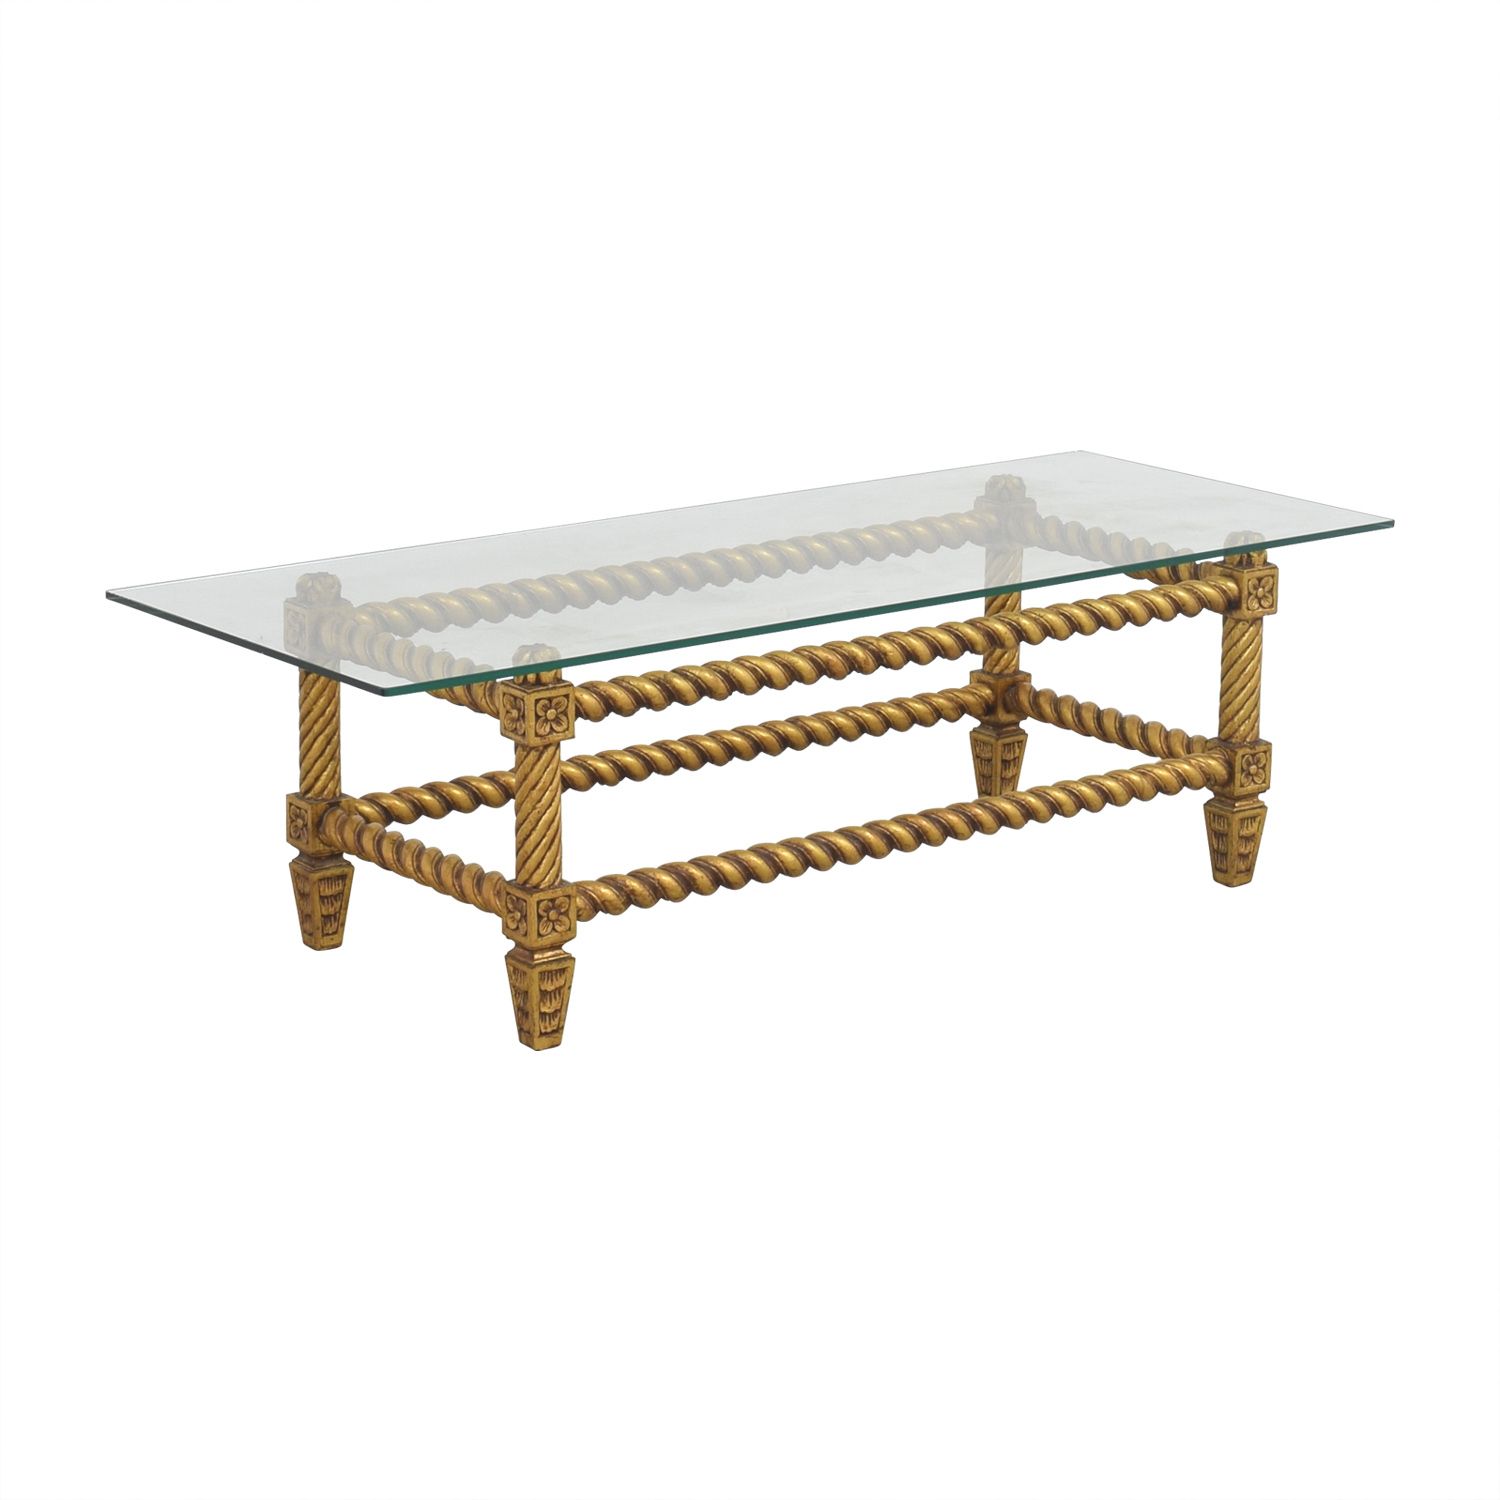 90% Off – Antique Glass And Gold Framed Coffee Table / Tables Inside Antique Blue Gold Coffee Tables (View 2 of 15)